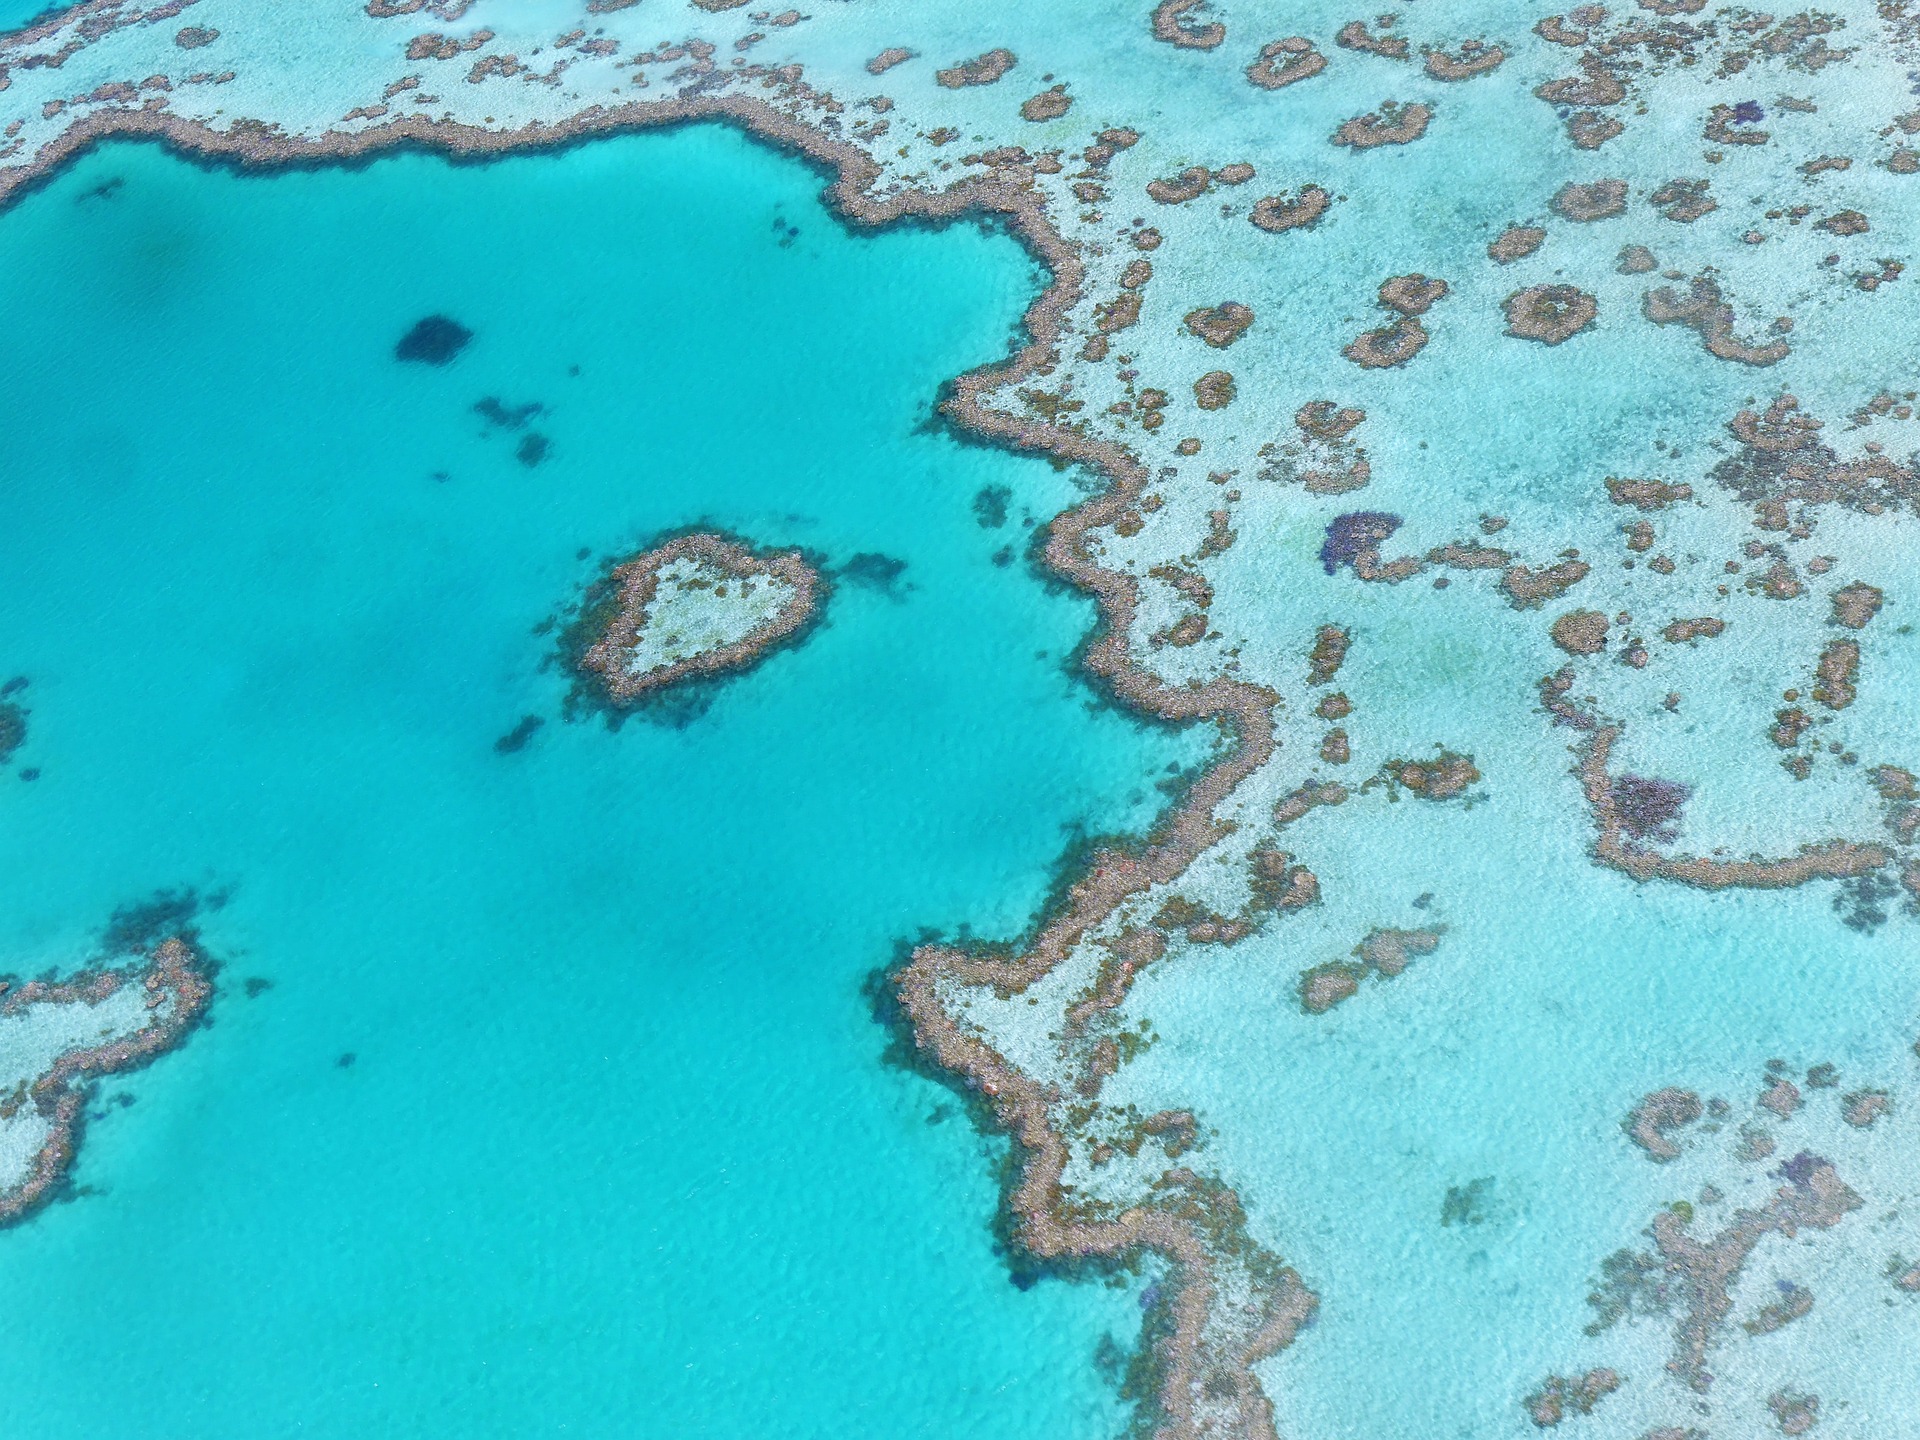 Studying in Australia as a teenager - great barrier reef